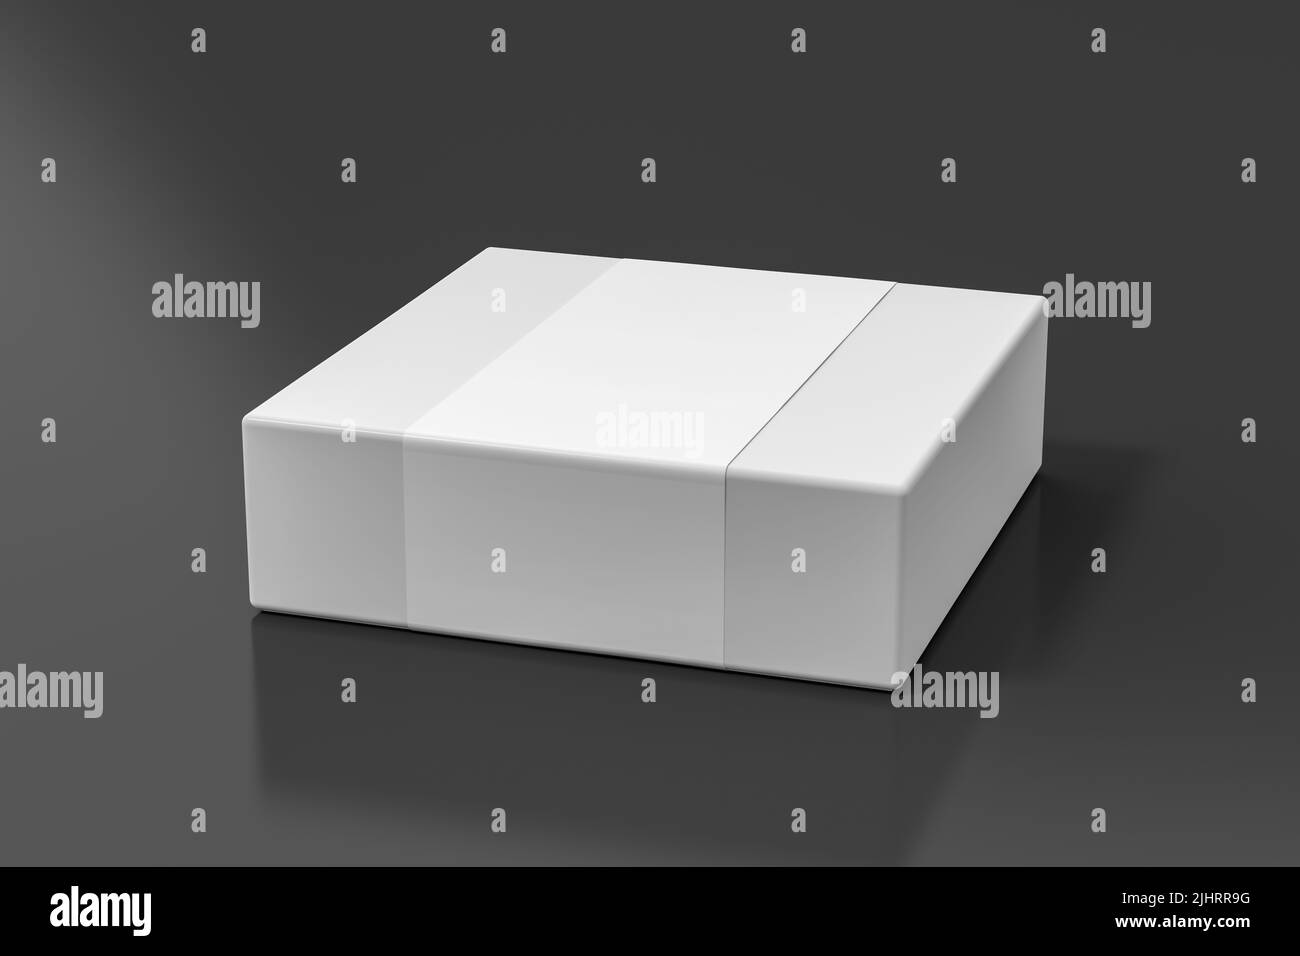 Square box mock up with blank paper cover label: White gift box on black background. Side view. 3d illustration Stock Photo